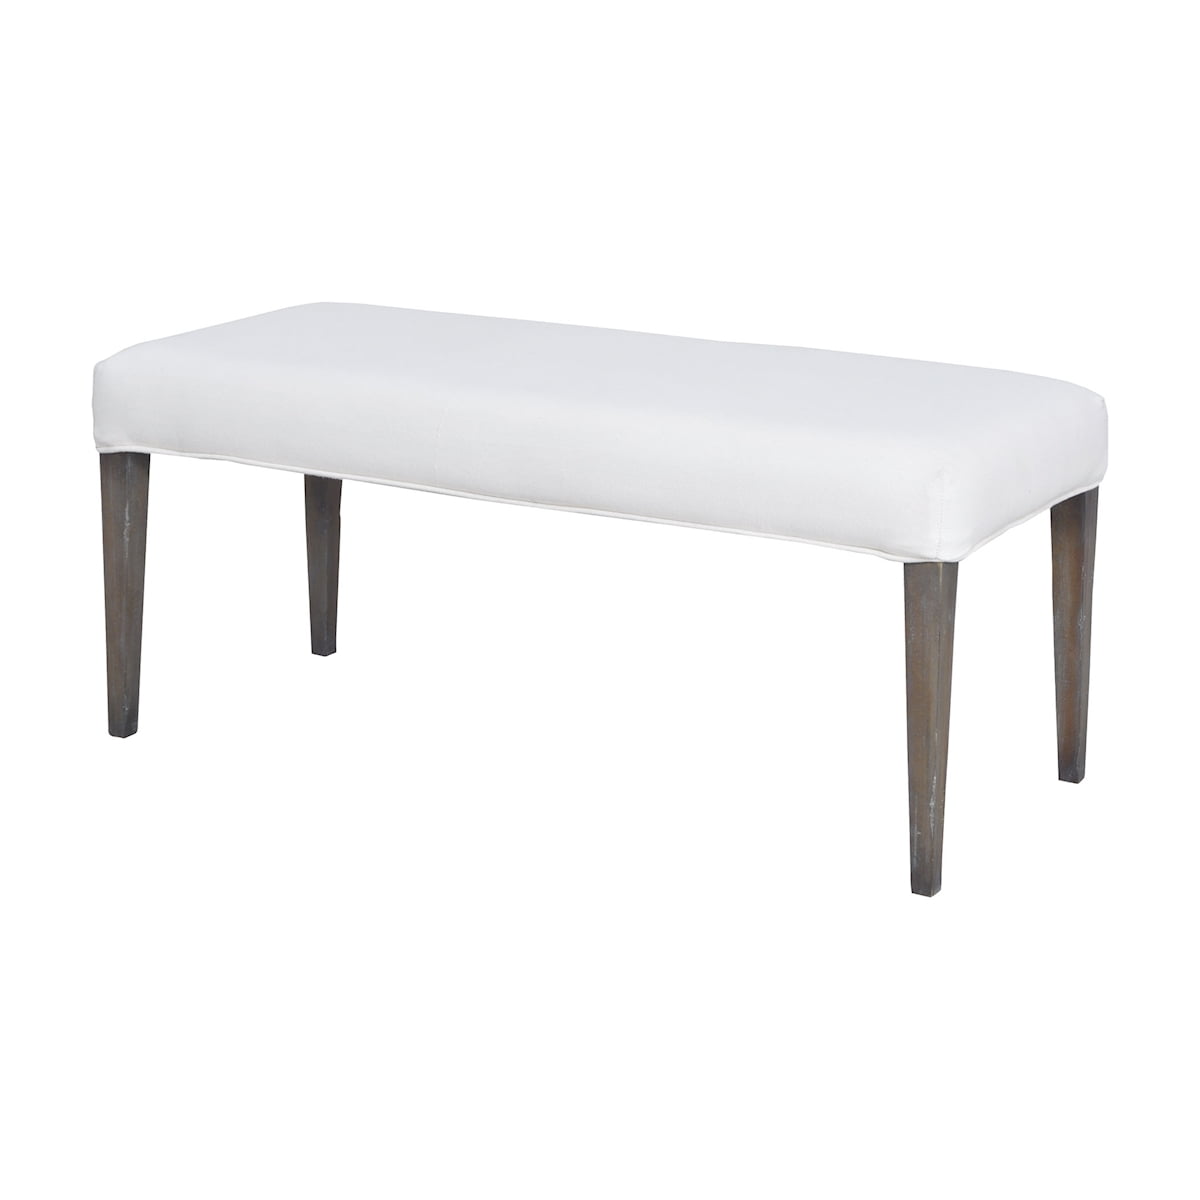 ELK Lighting Couture Double Bench Cover-Light Grey